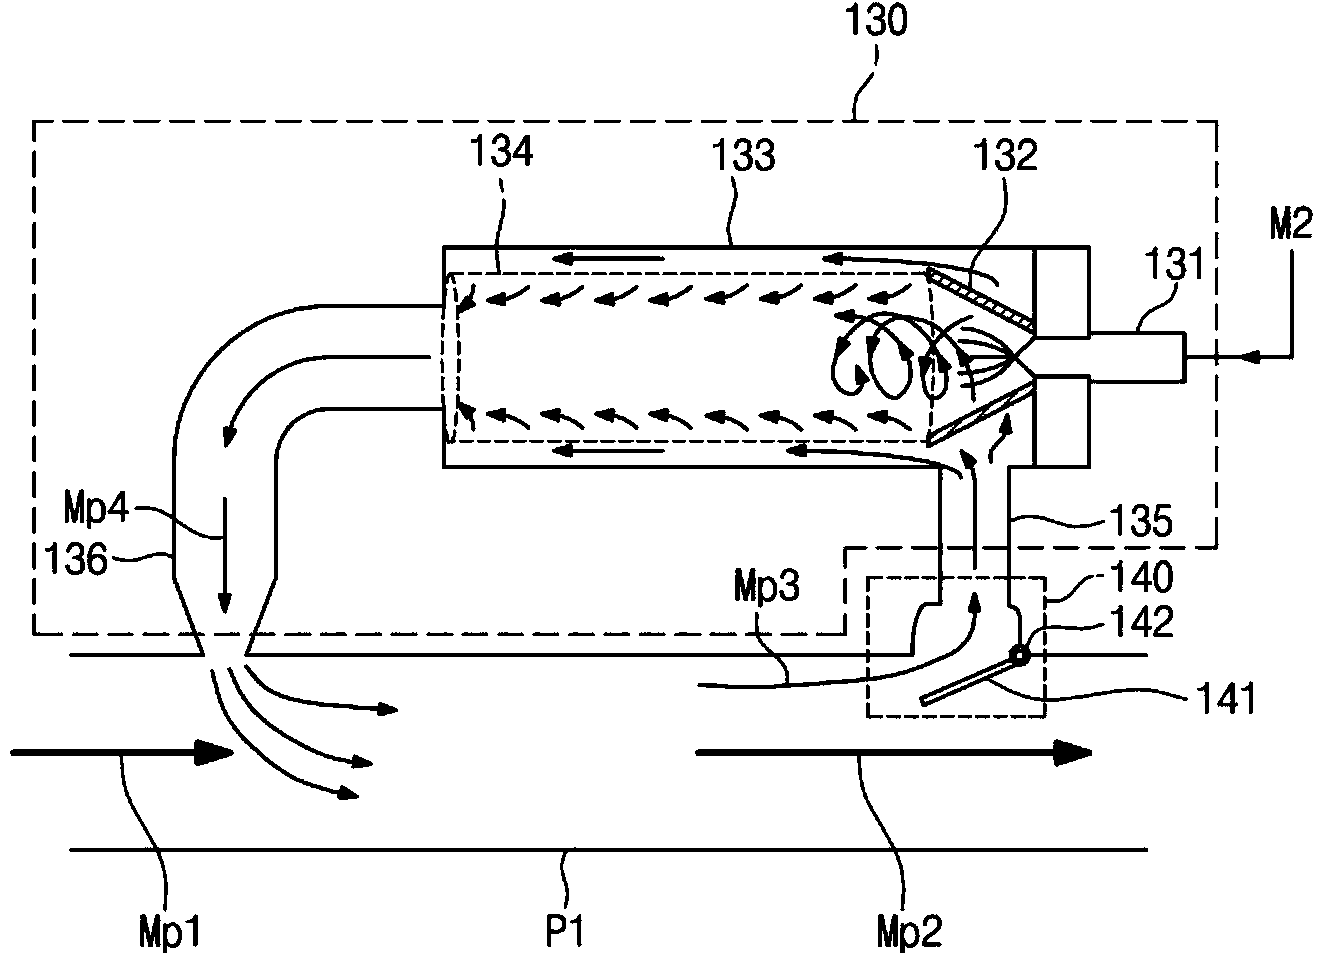 Apparatus for removing nitrogen oxides